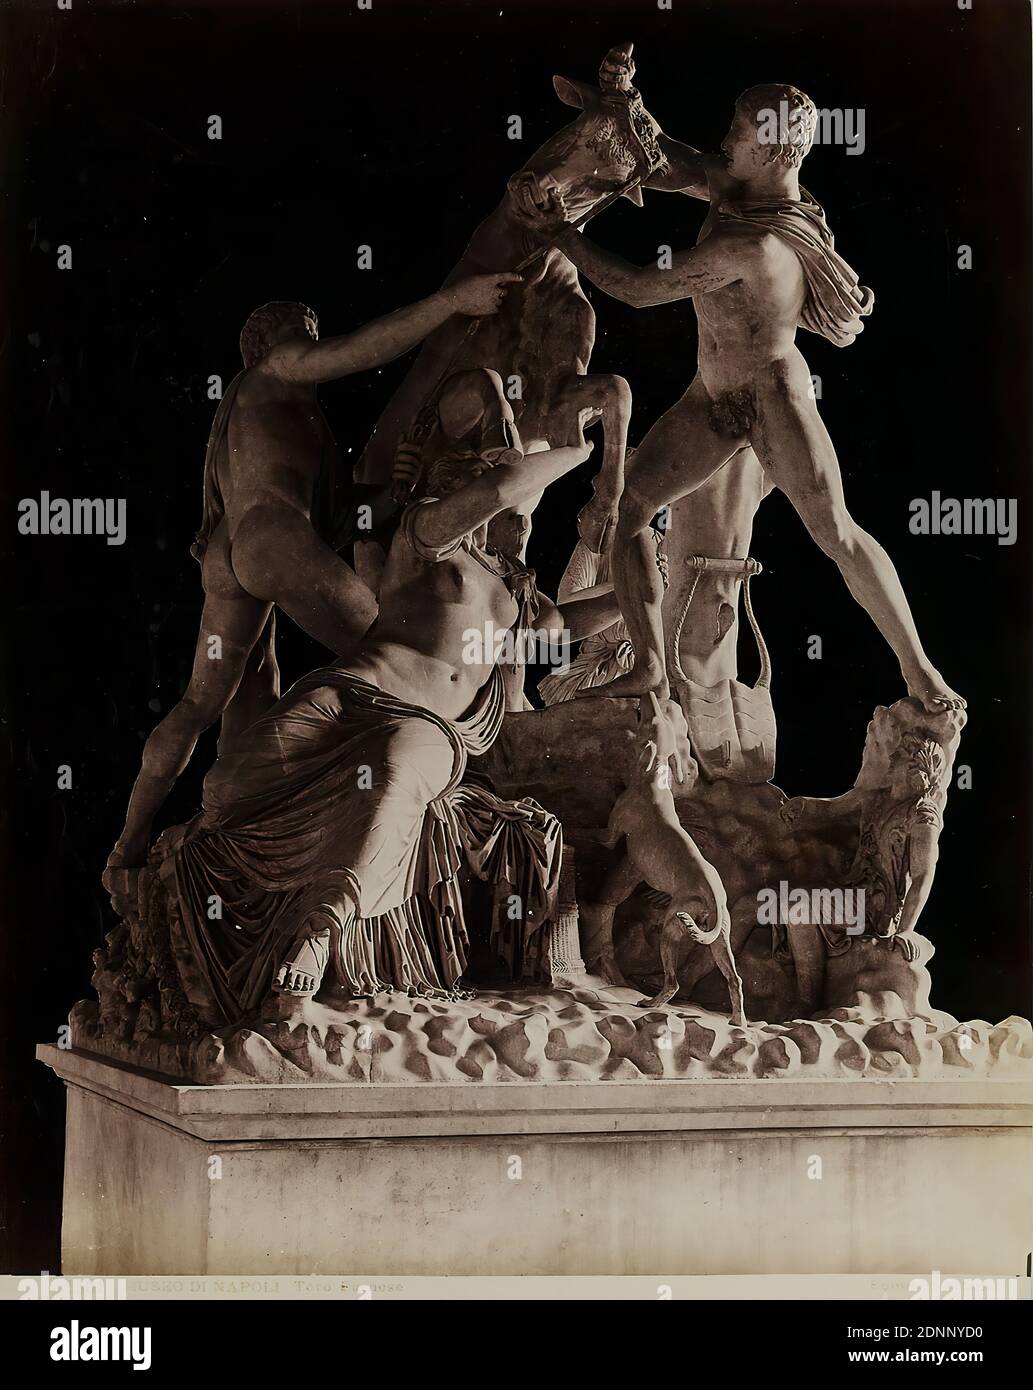 Giorgio Sommer, Museo di Napoli - Toro Farnese, albumin paper, black and white positive process, image size: height: 25.80 cm; width: 20.60 cm, inscribed: recto u. exposed: 1501 MUSEO DI NAPOLI Toro Farnese Sommer - Napoli, inventory, sculpture, plastic, sculpture art, classical mythology/antique history Stock Photo